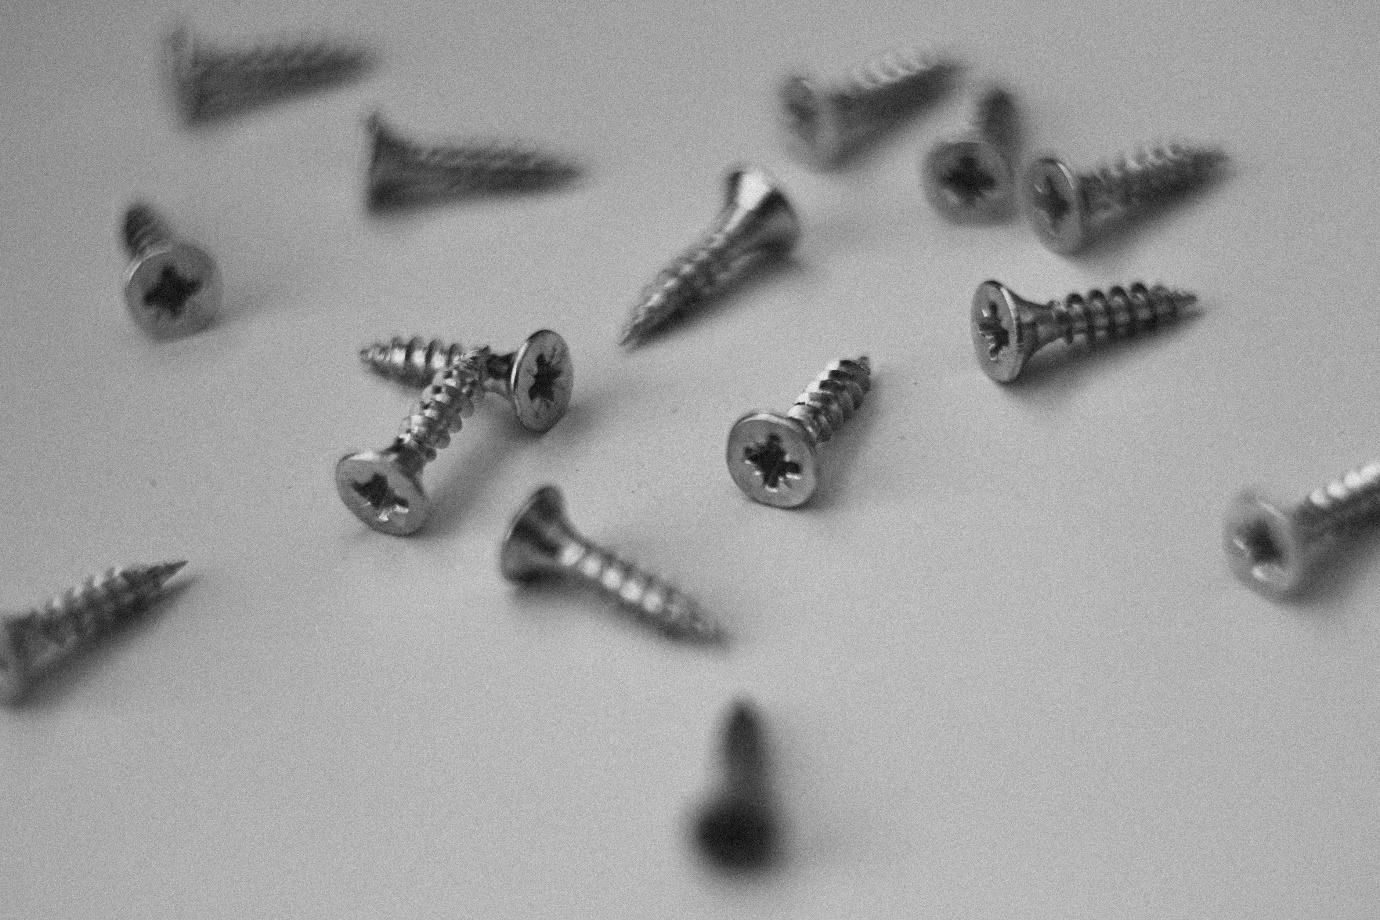 A group of screws on a white surface
Description automatically generated